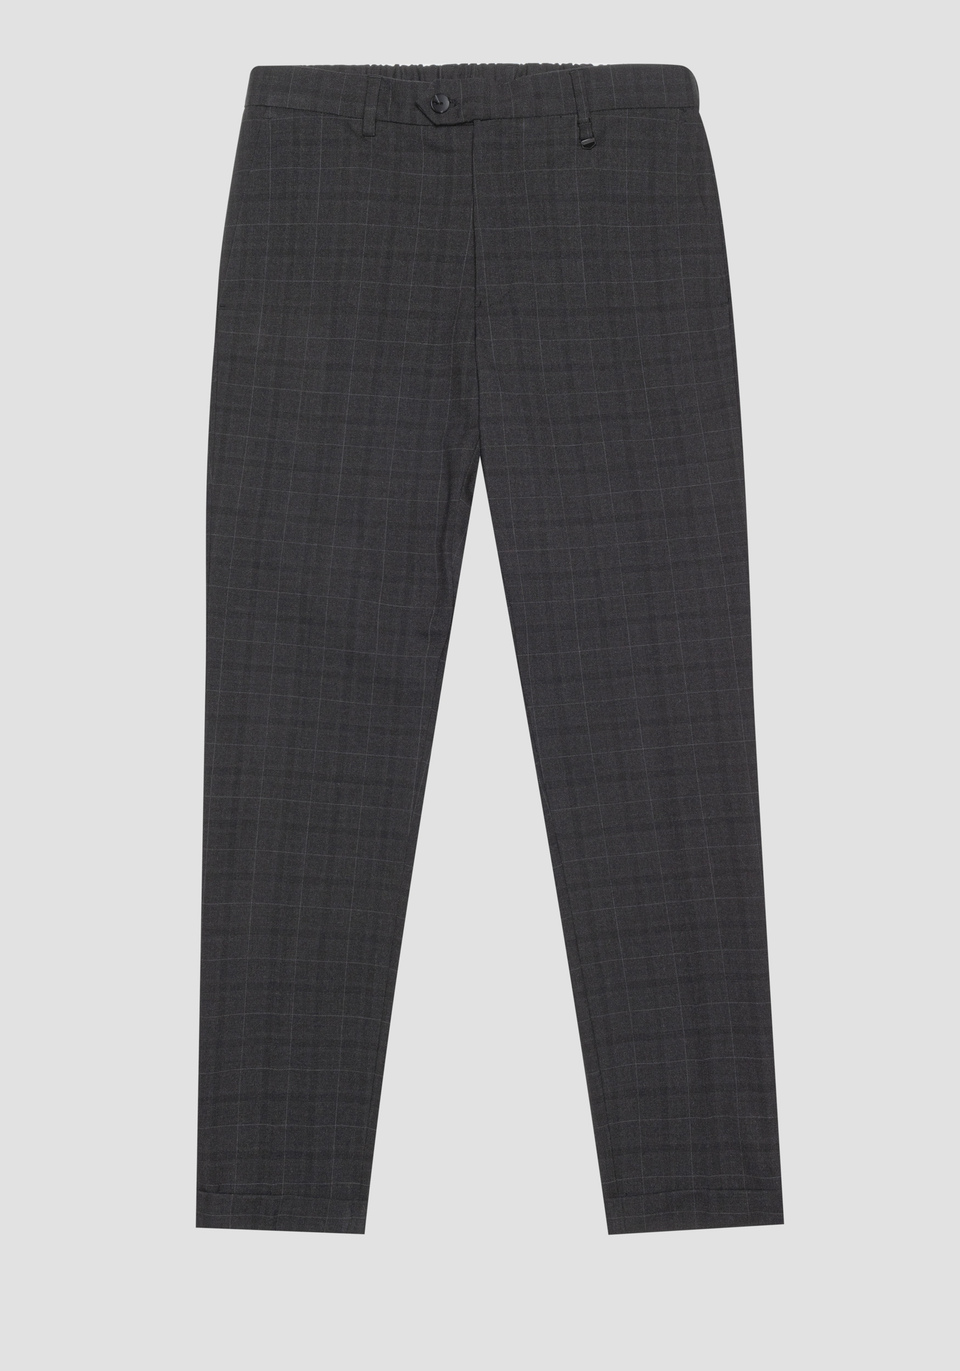 "RAD" SLIM FIT ANKLE-LENGTH TROUSERS WITH CHECK PATTERN - Antony Morato Online Shop